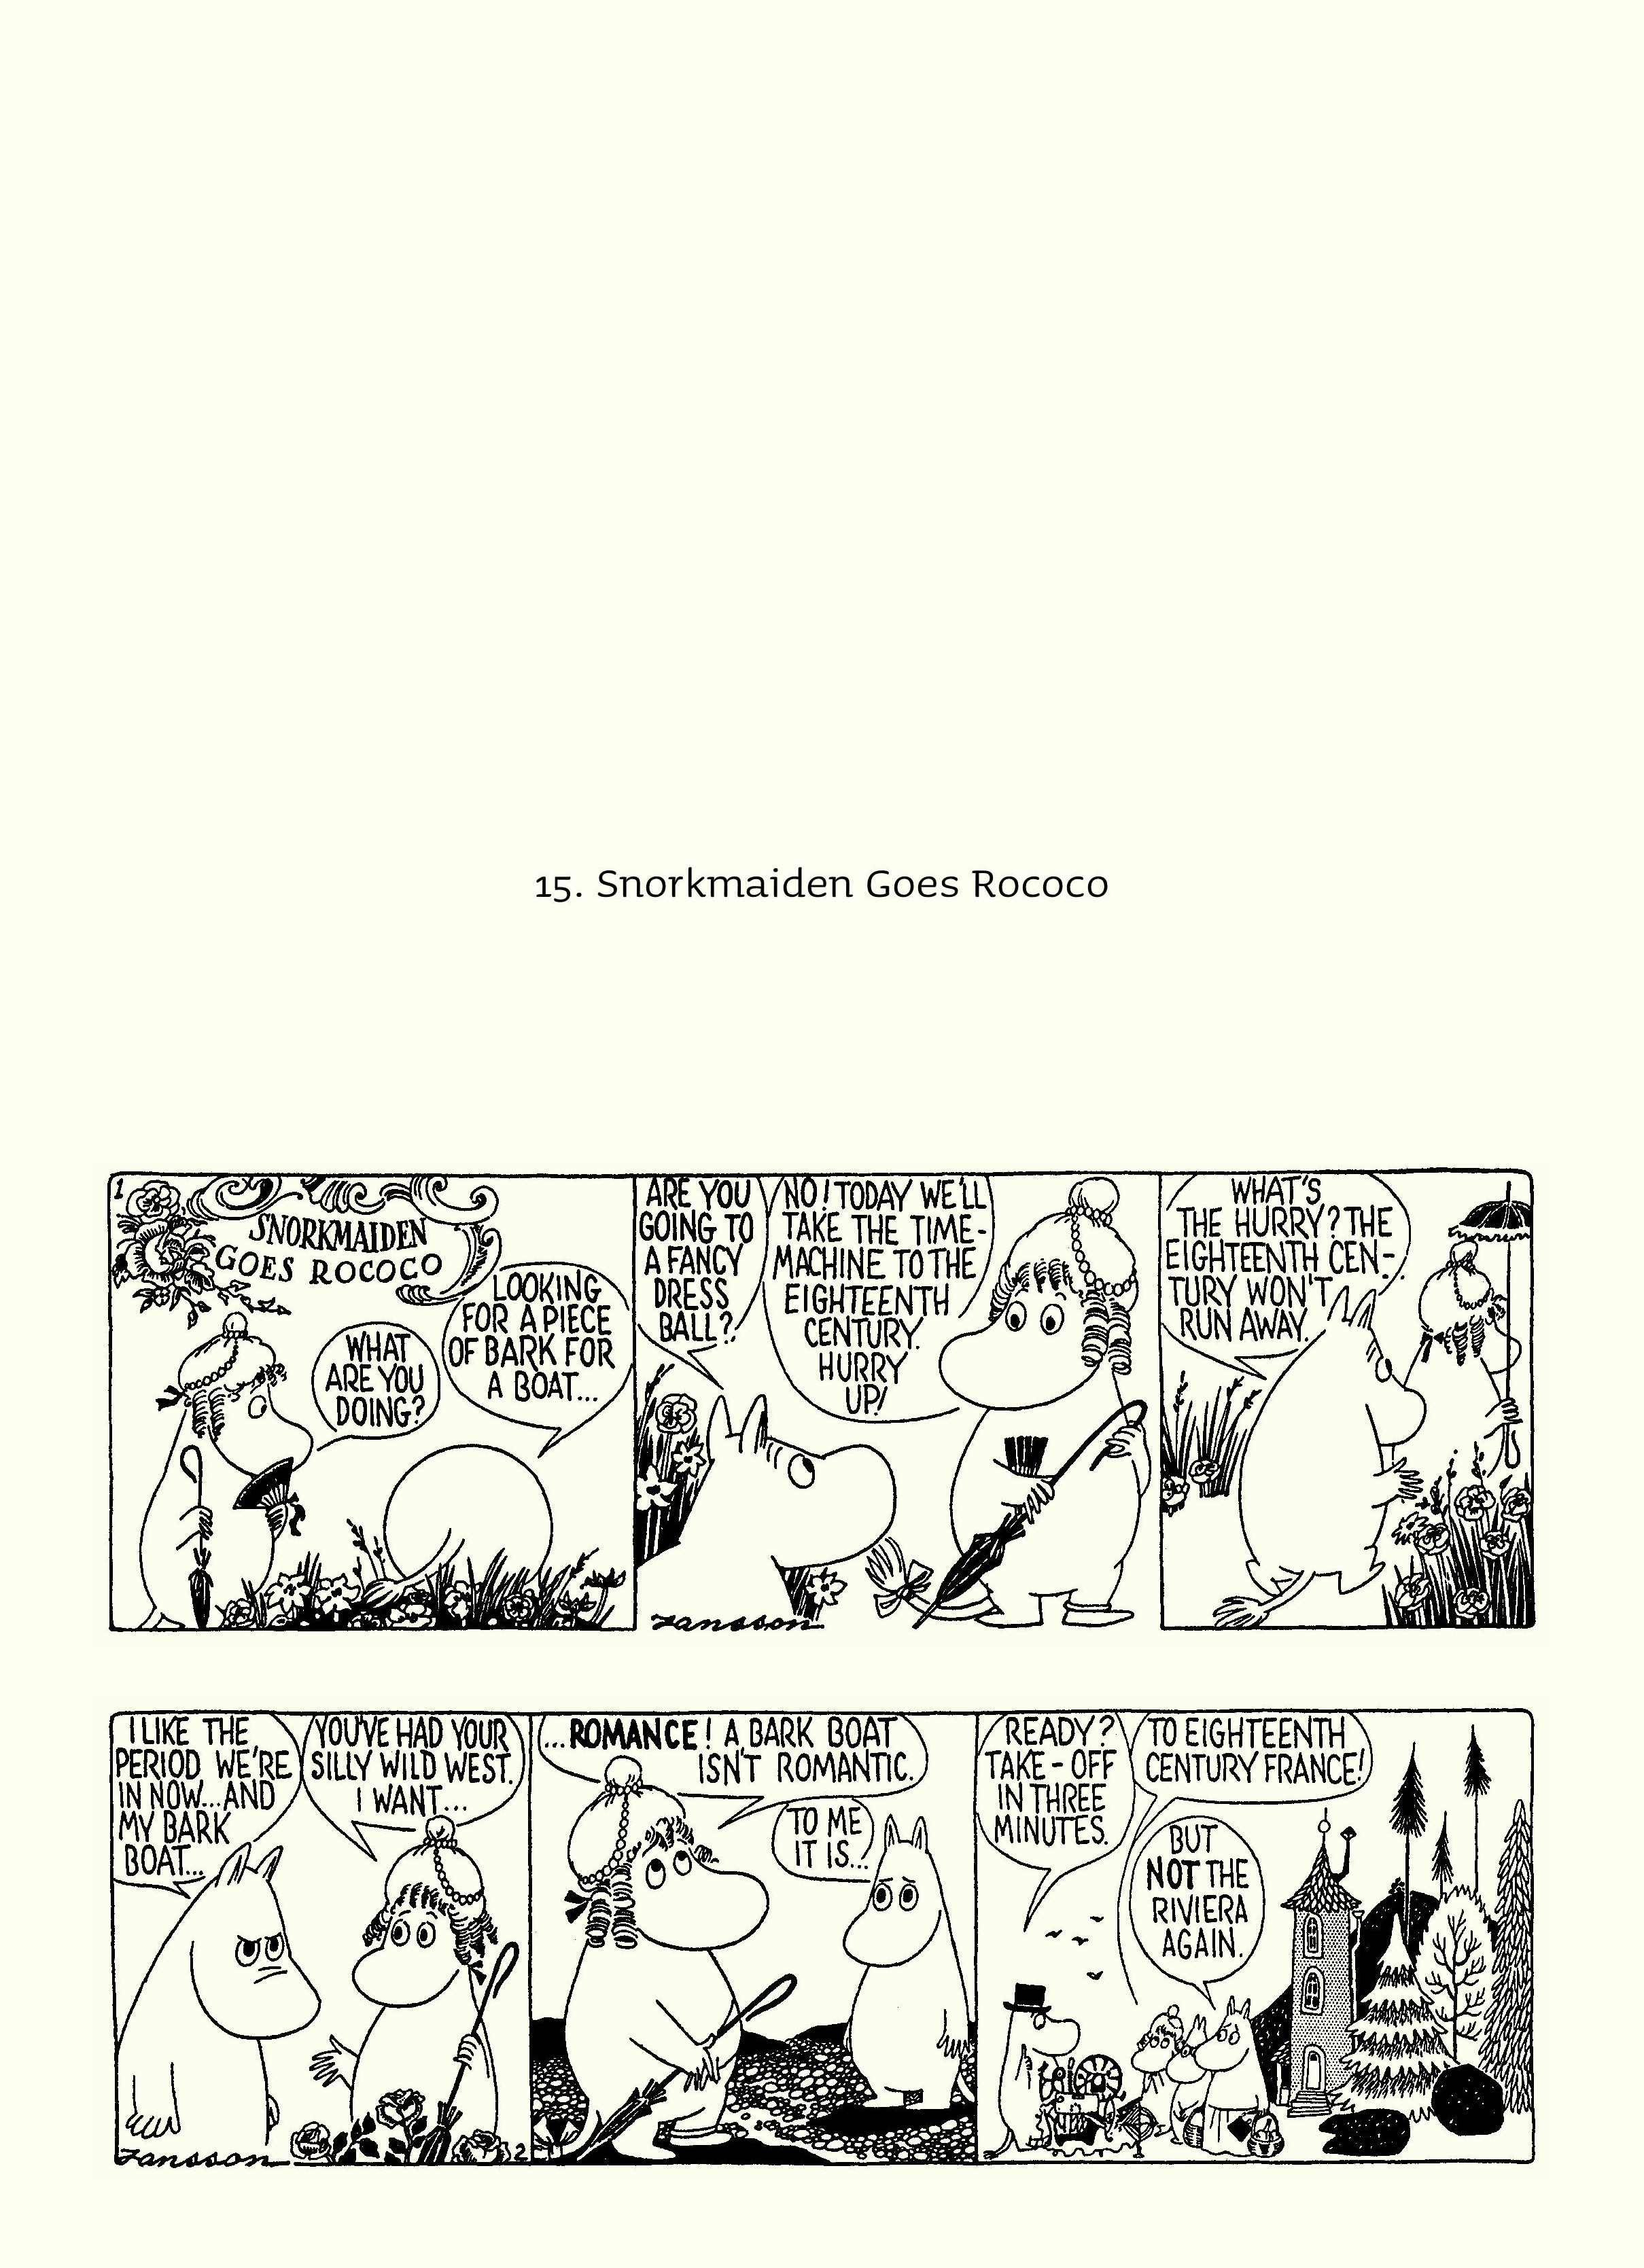 Read online Moomin: The Complete Tove Jansson Comic Strip comic -  Issue # TPB 4 - 23